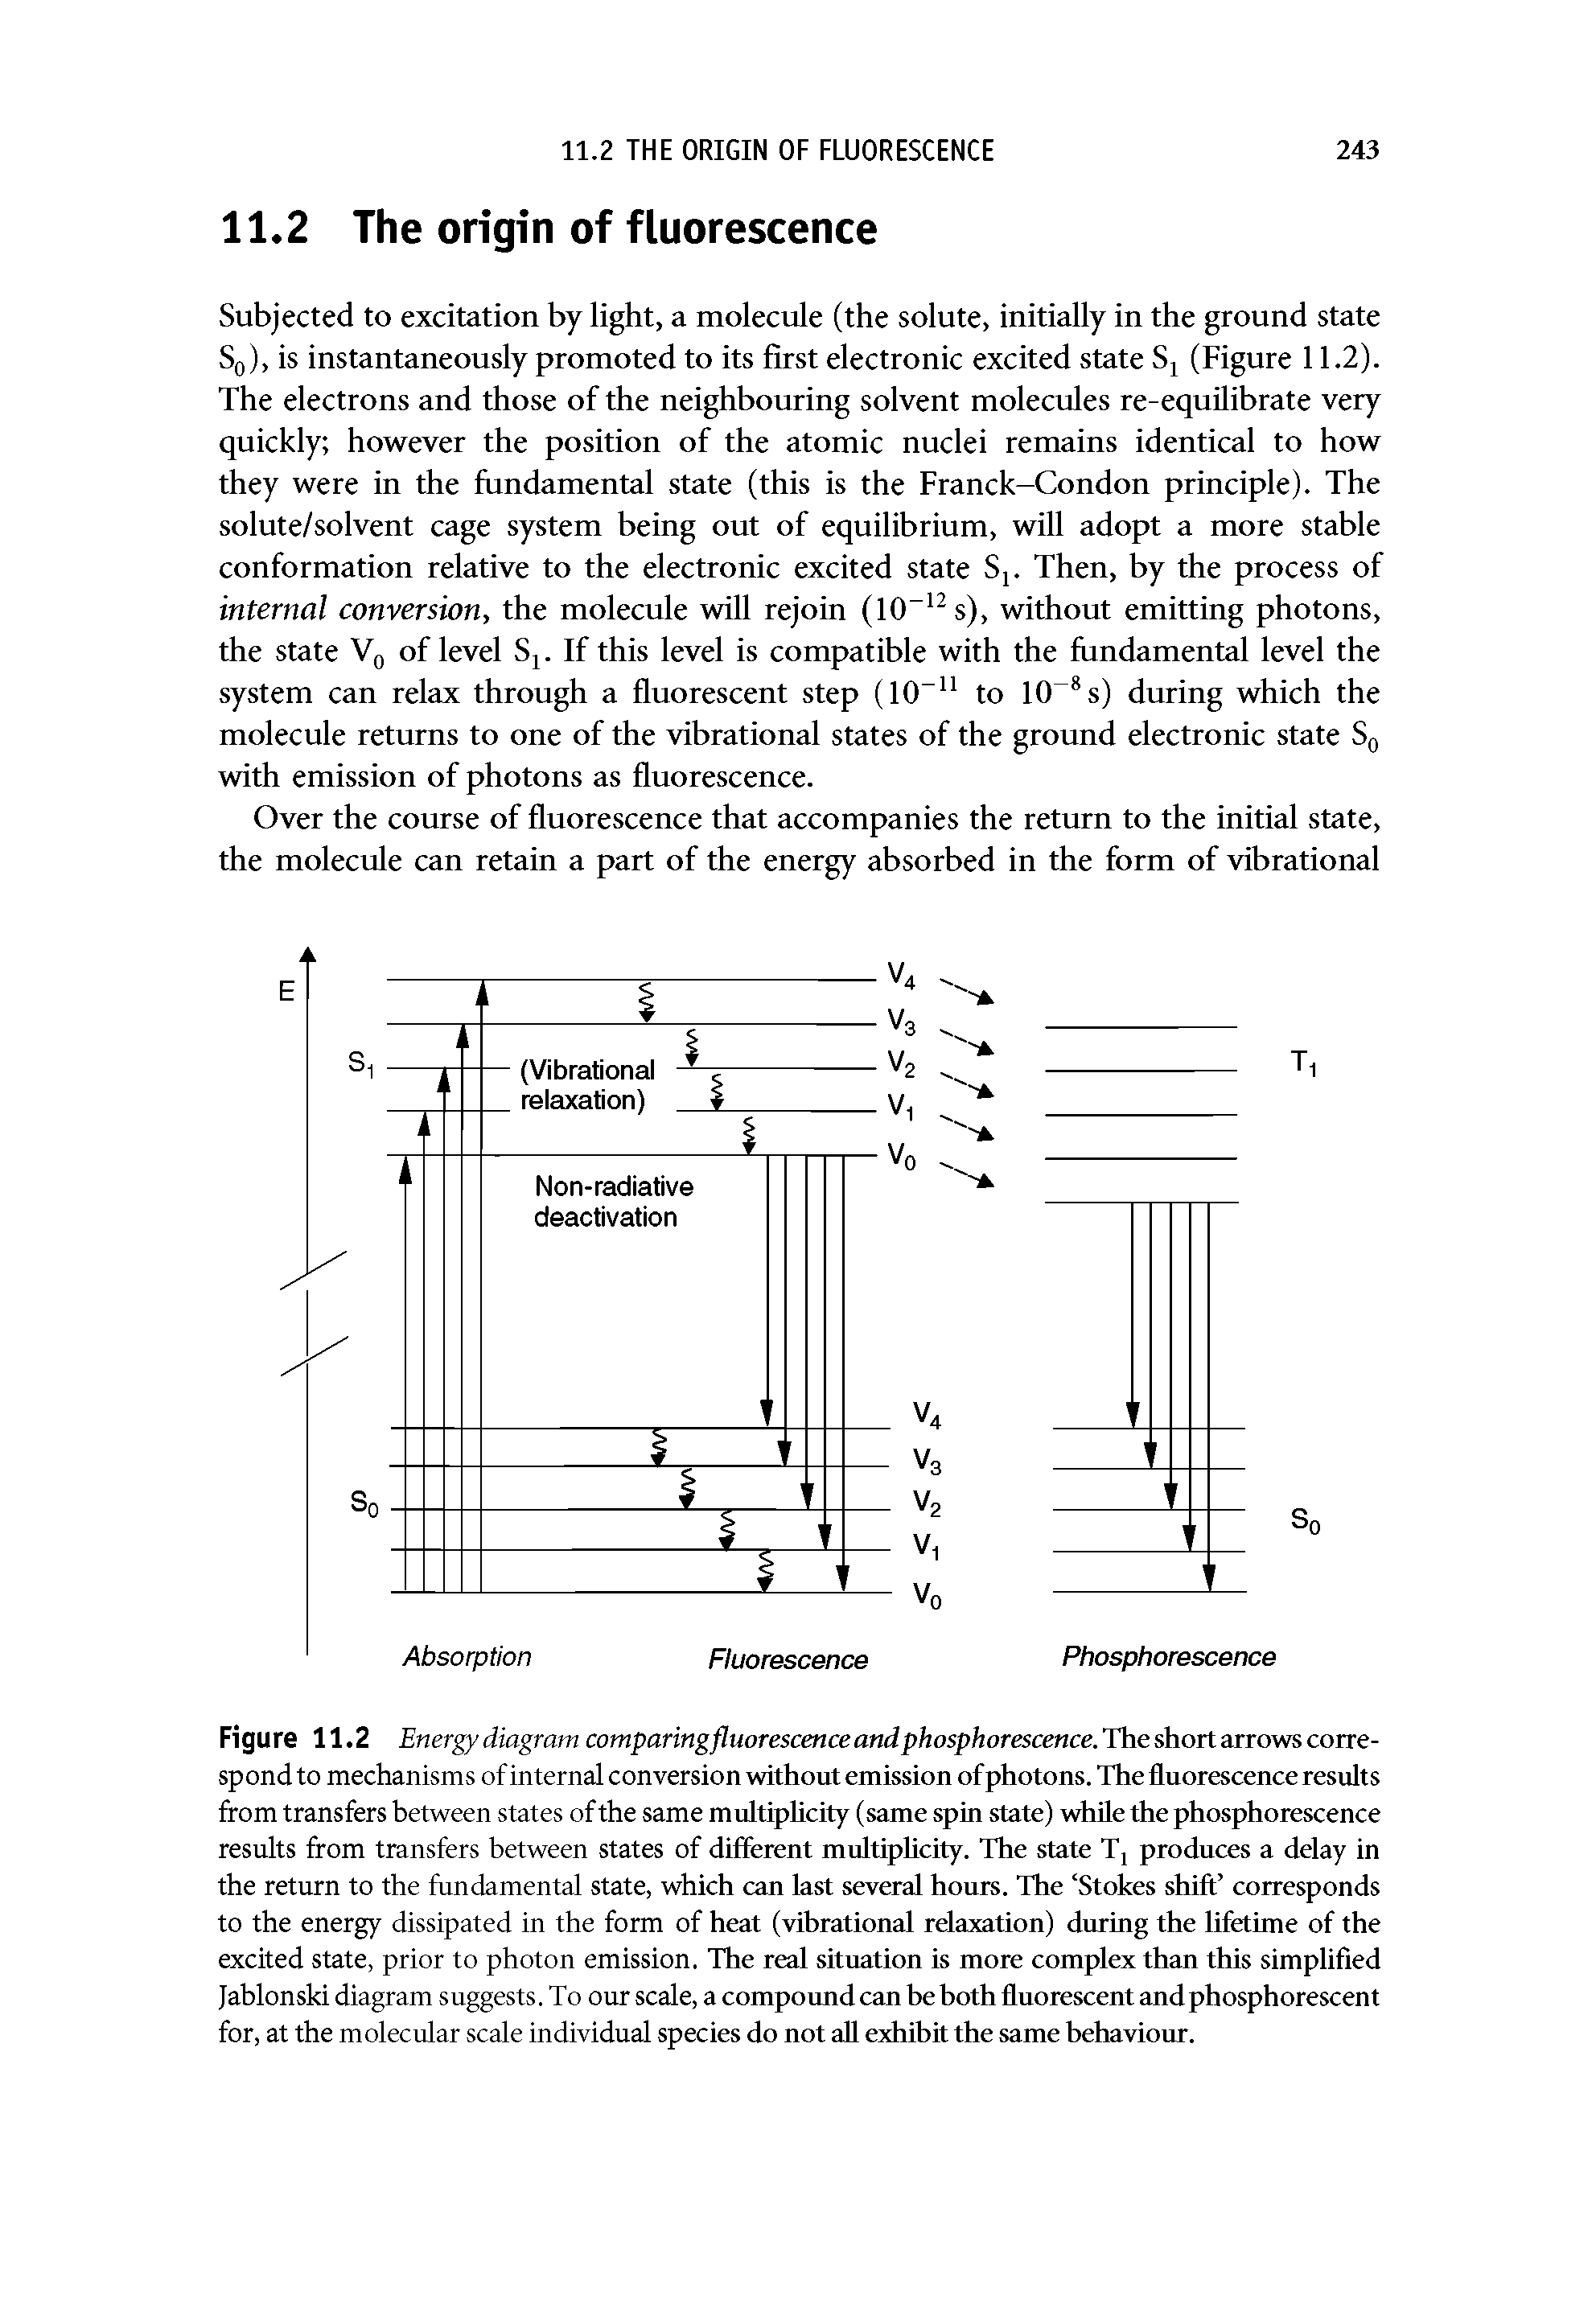 Figure 11.2 Energy diagram comparingfluorescenceandphosphorescence.Theshoitaxiowscoue-spond to mechanisms of internal conversion without emission ofphotons. The fluorescence results from transfers between states of the same multiplicity (same spin state) while the phosphorescence results from transfers between states of different multiplicity. The state Tj produces a delay in the return to the fundamental state, which can last several hours. The Stokes shift corresponds to the energy dissipated in the form of heat (vibrational relaxation) during the lifetime of the excited state, prior to photon emission. The real situation is more complex than this simplified Jablonski diagram suggests. To our scale, a compound can be both fluorescent and phosphorescent for, at the molecular scale individual species do not all exhibit the same behaviour.